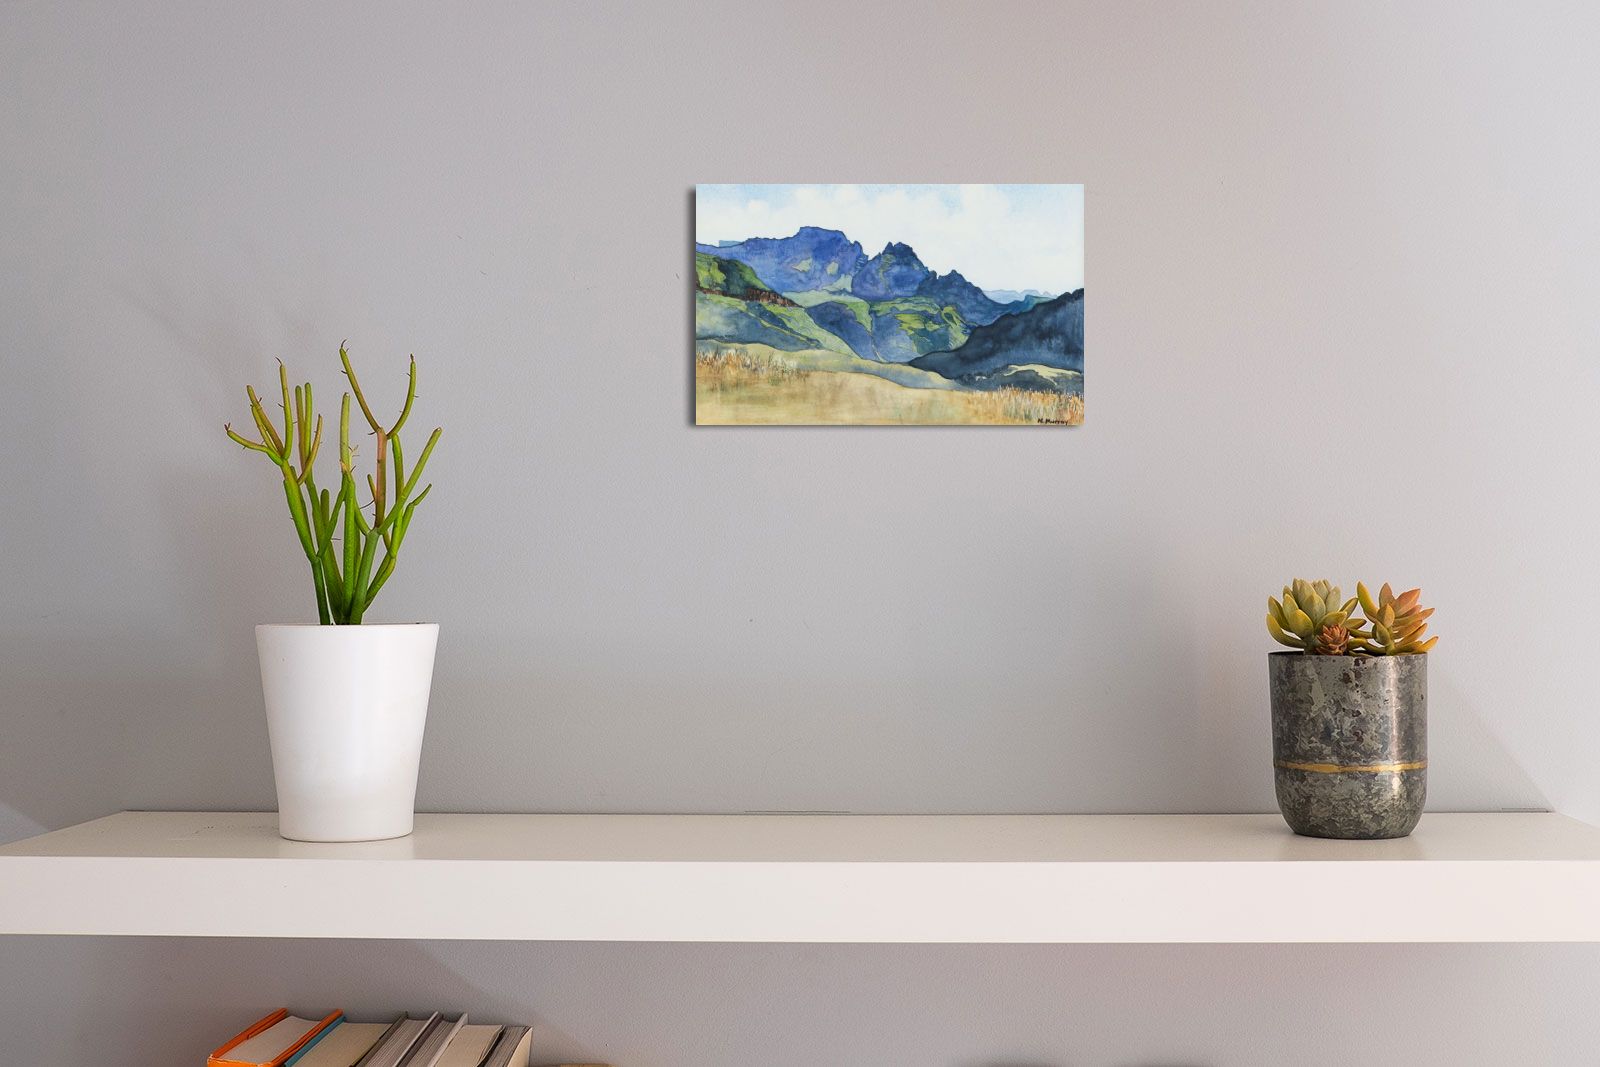 MOUNTAIN RANGE by N. Murray at Ross's Online Art Auctions